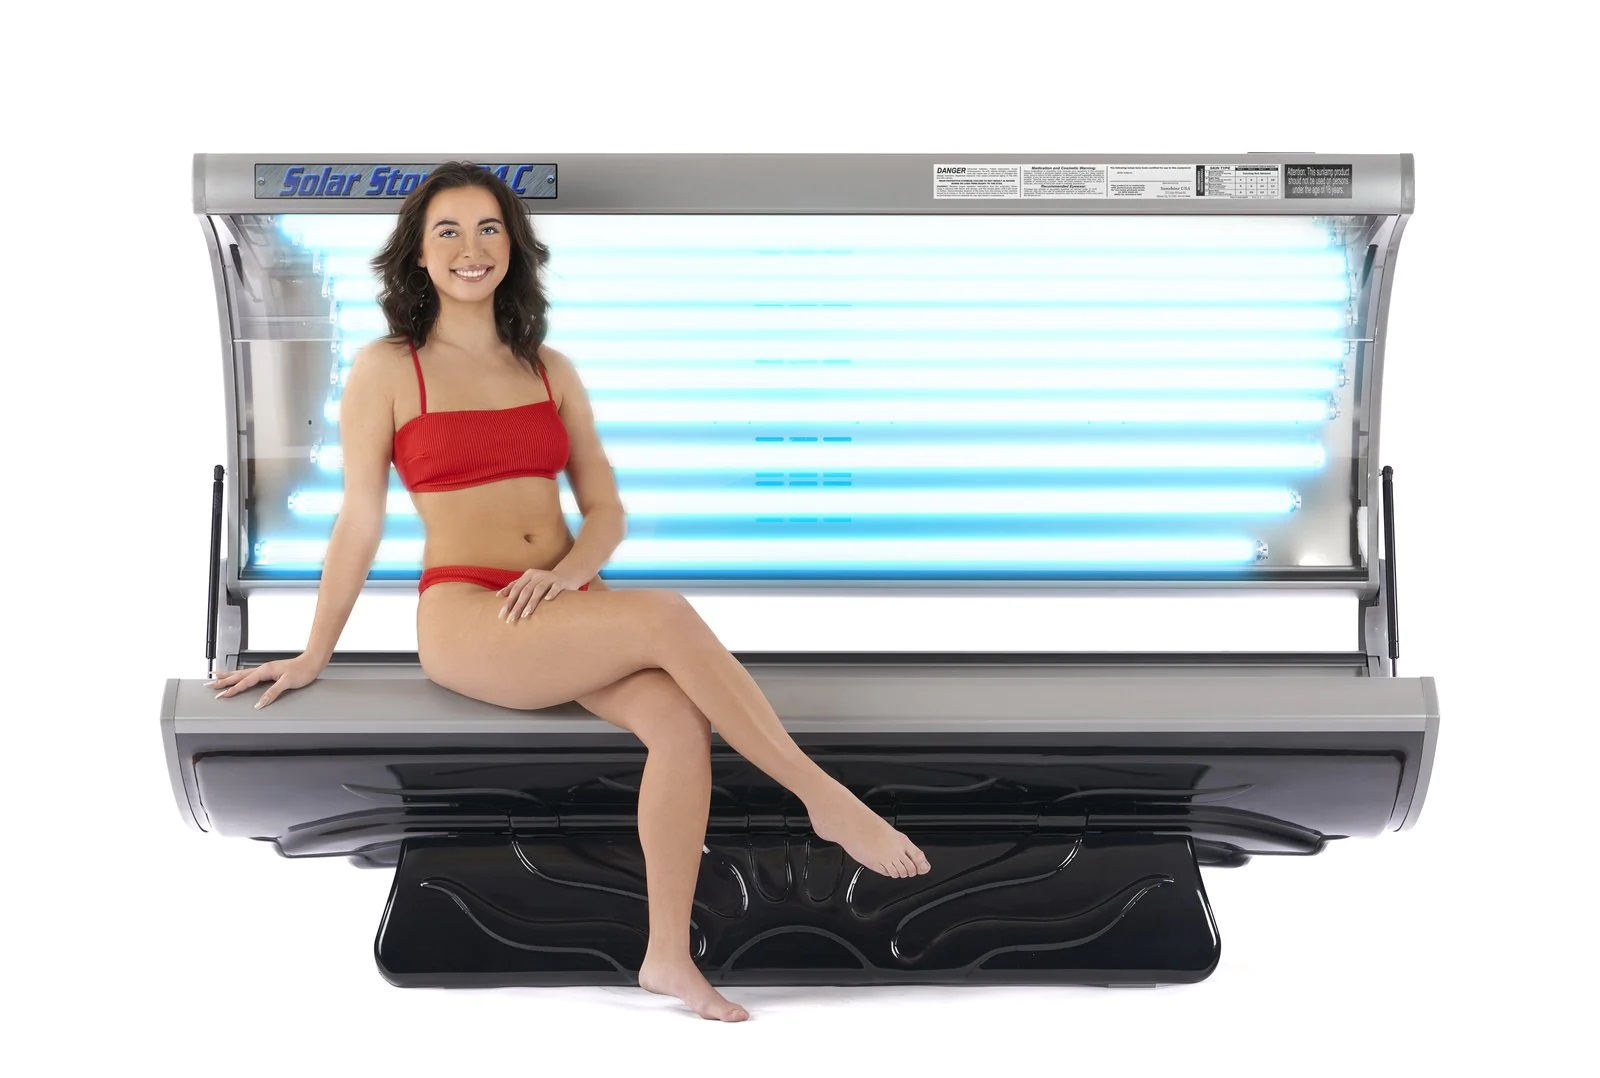 SOLAR STORM 24C 220V COMMERCIAL TANNING BED Call for Total Pricing with delivery time